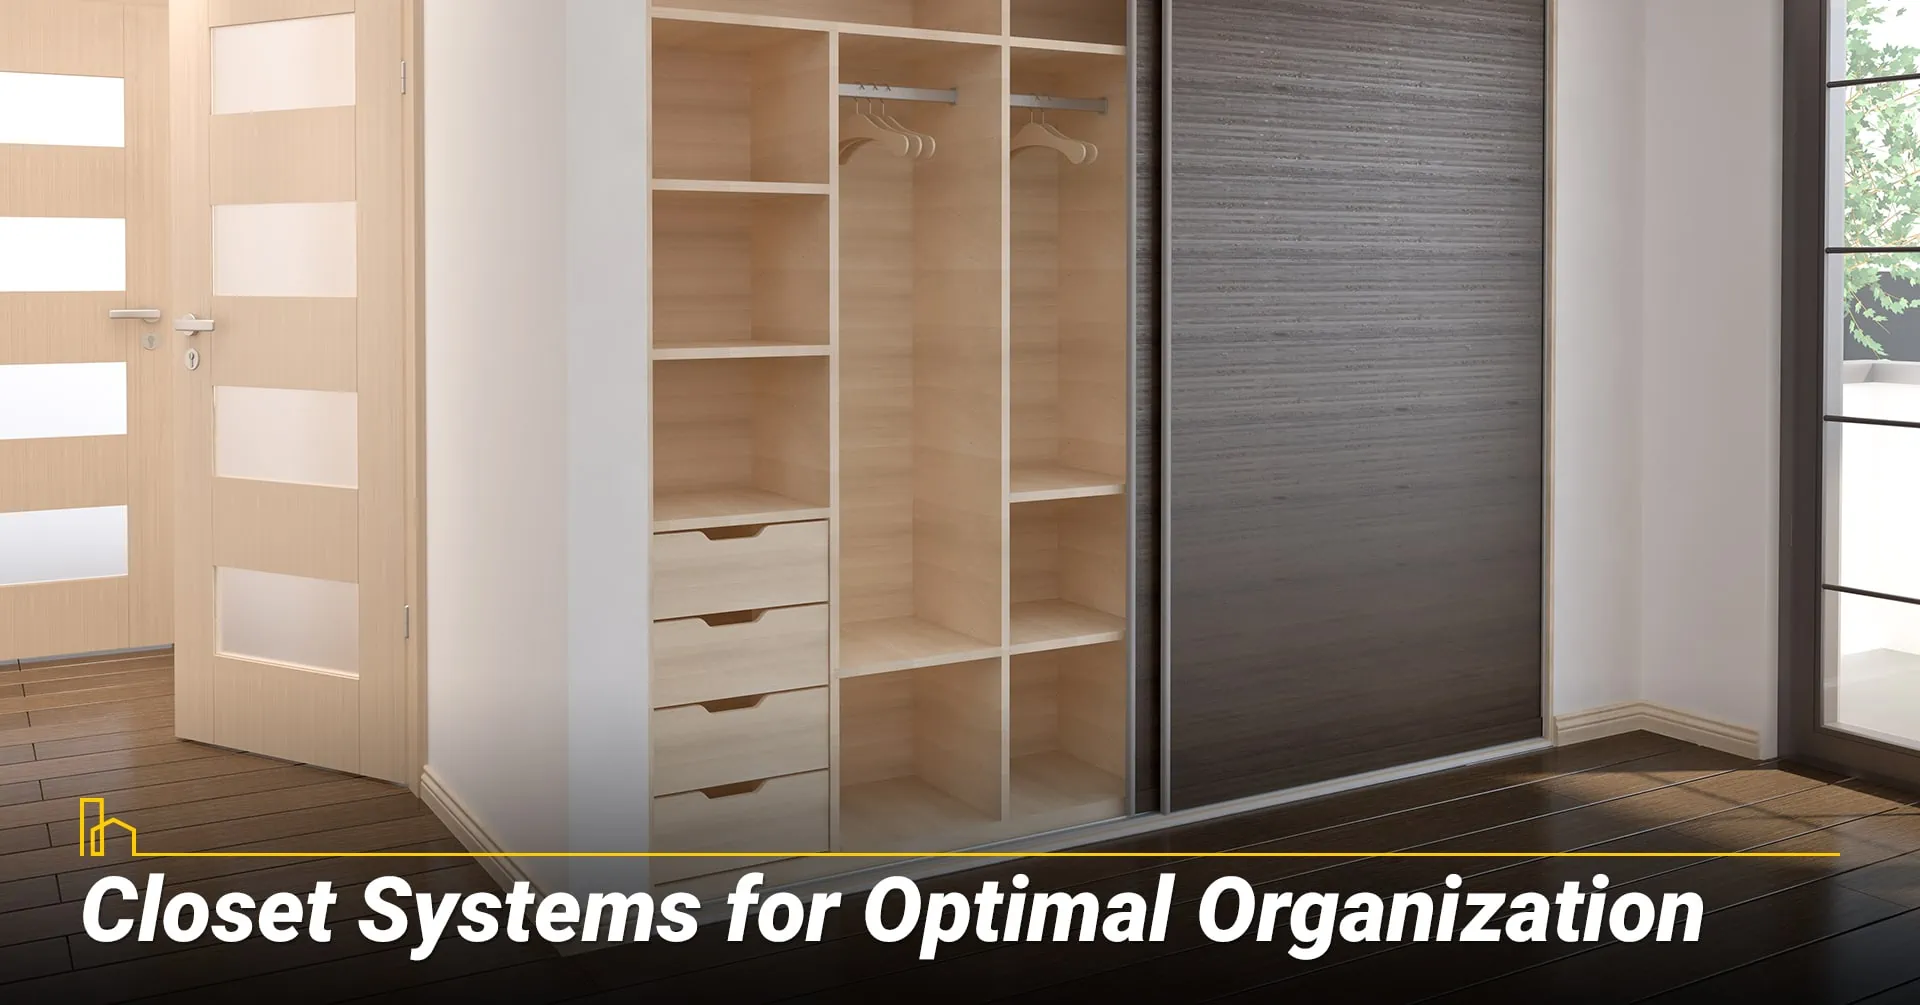 Closet Systems for Optimal Organization